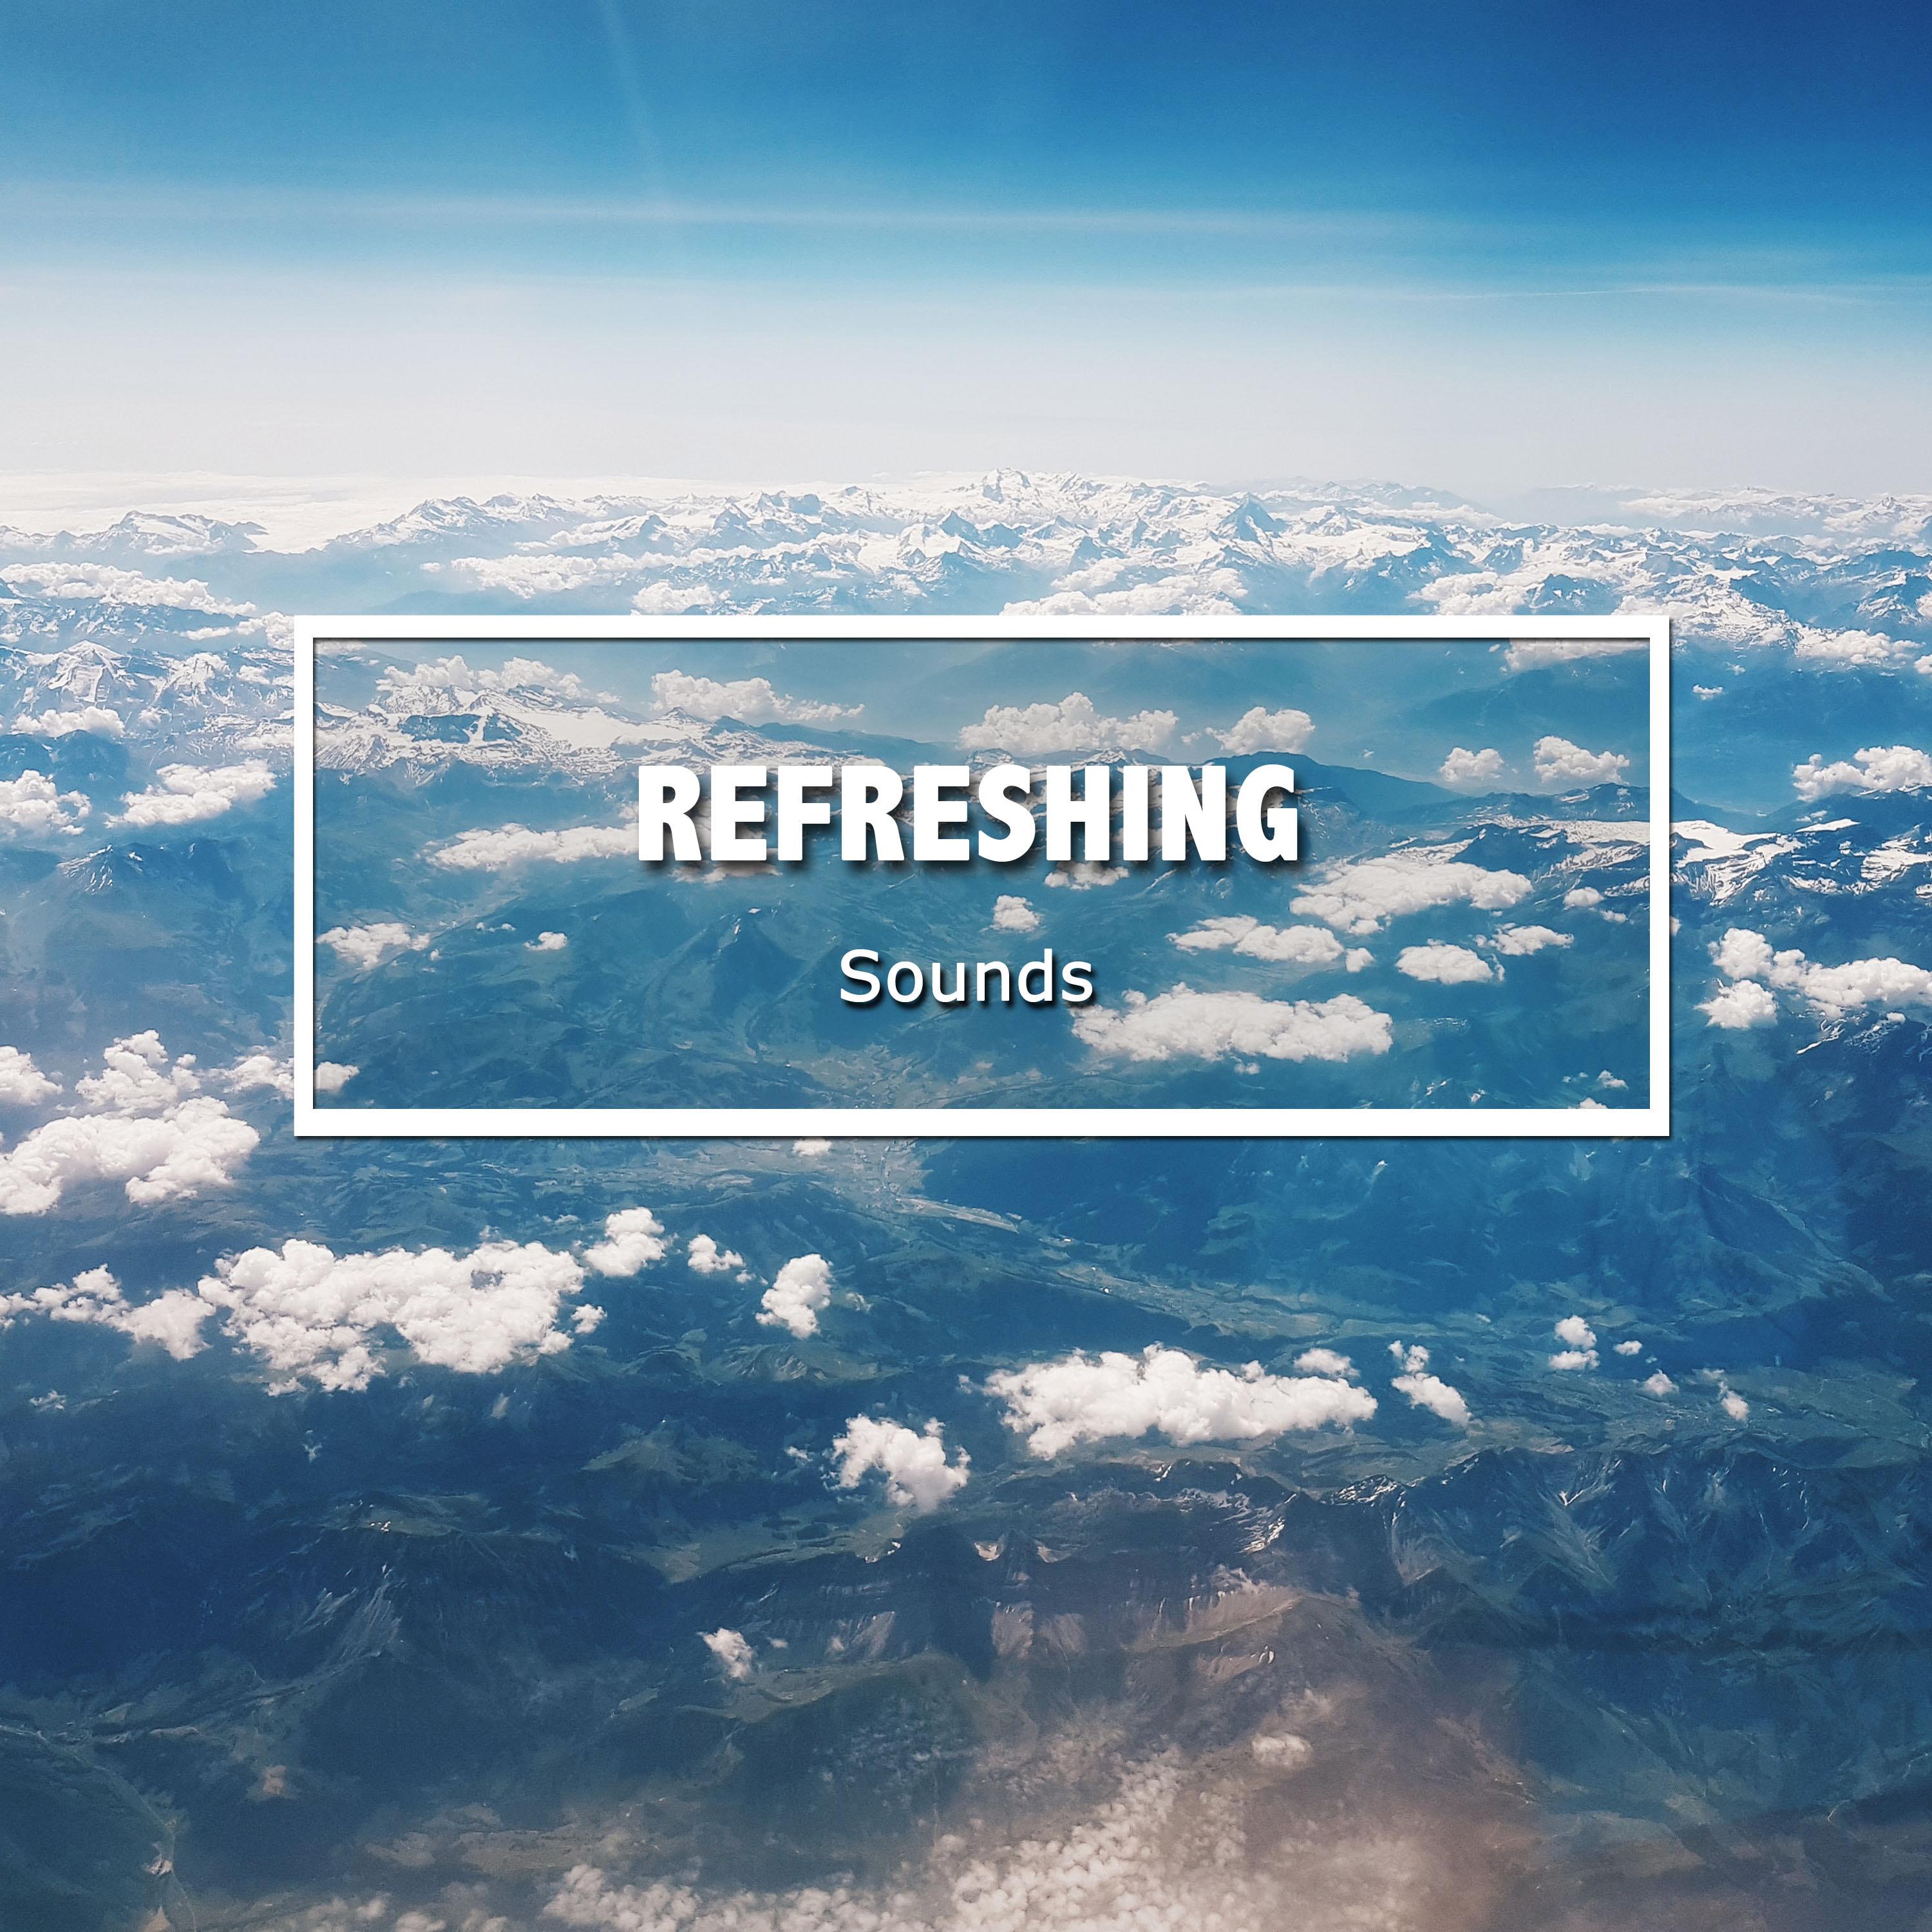 #11 Refreshing Sounds to Aid Meditation & Find Calm